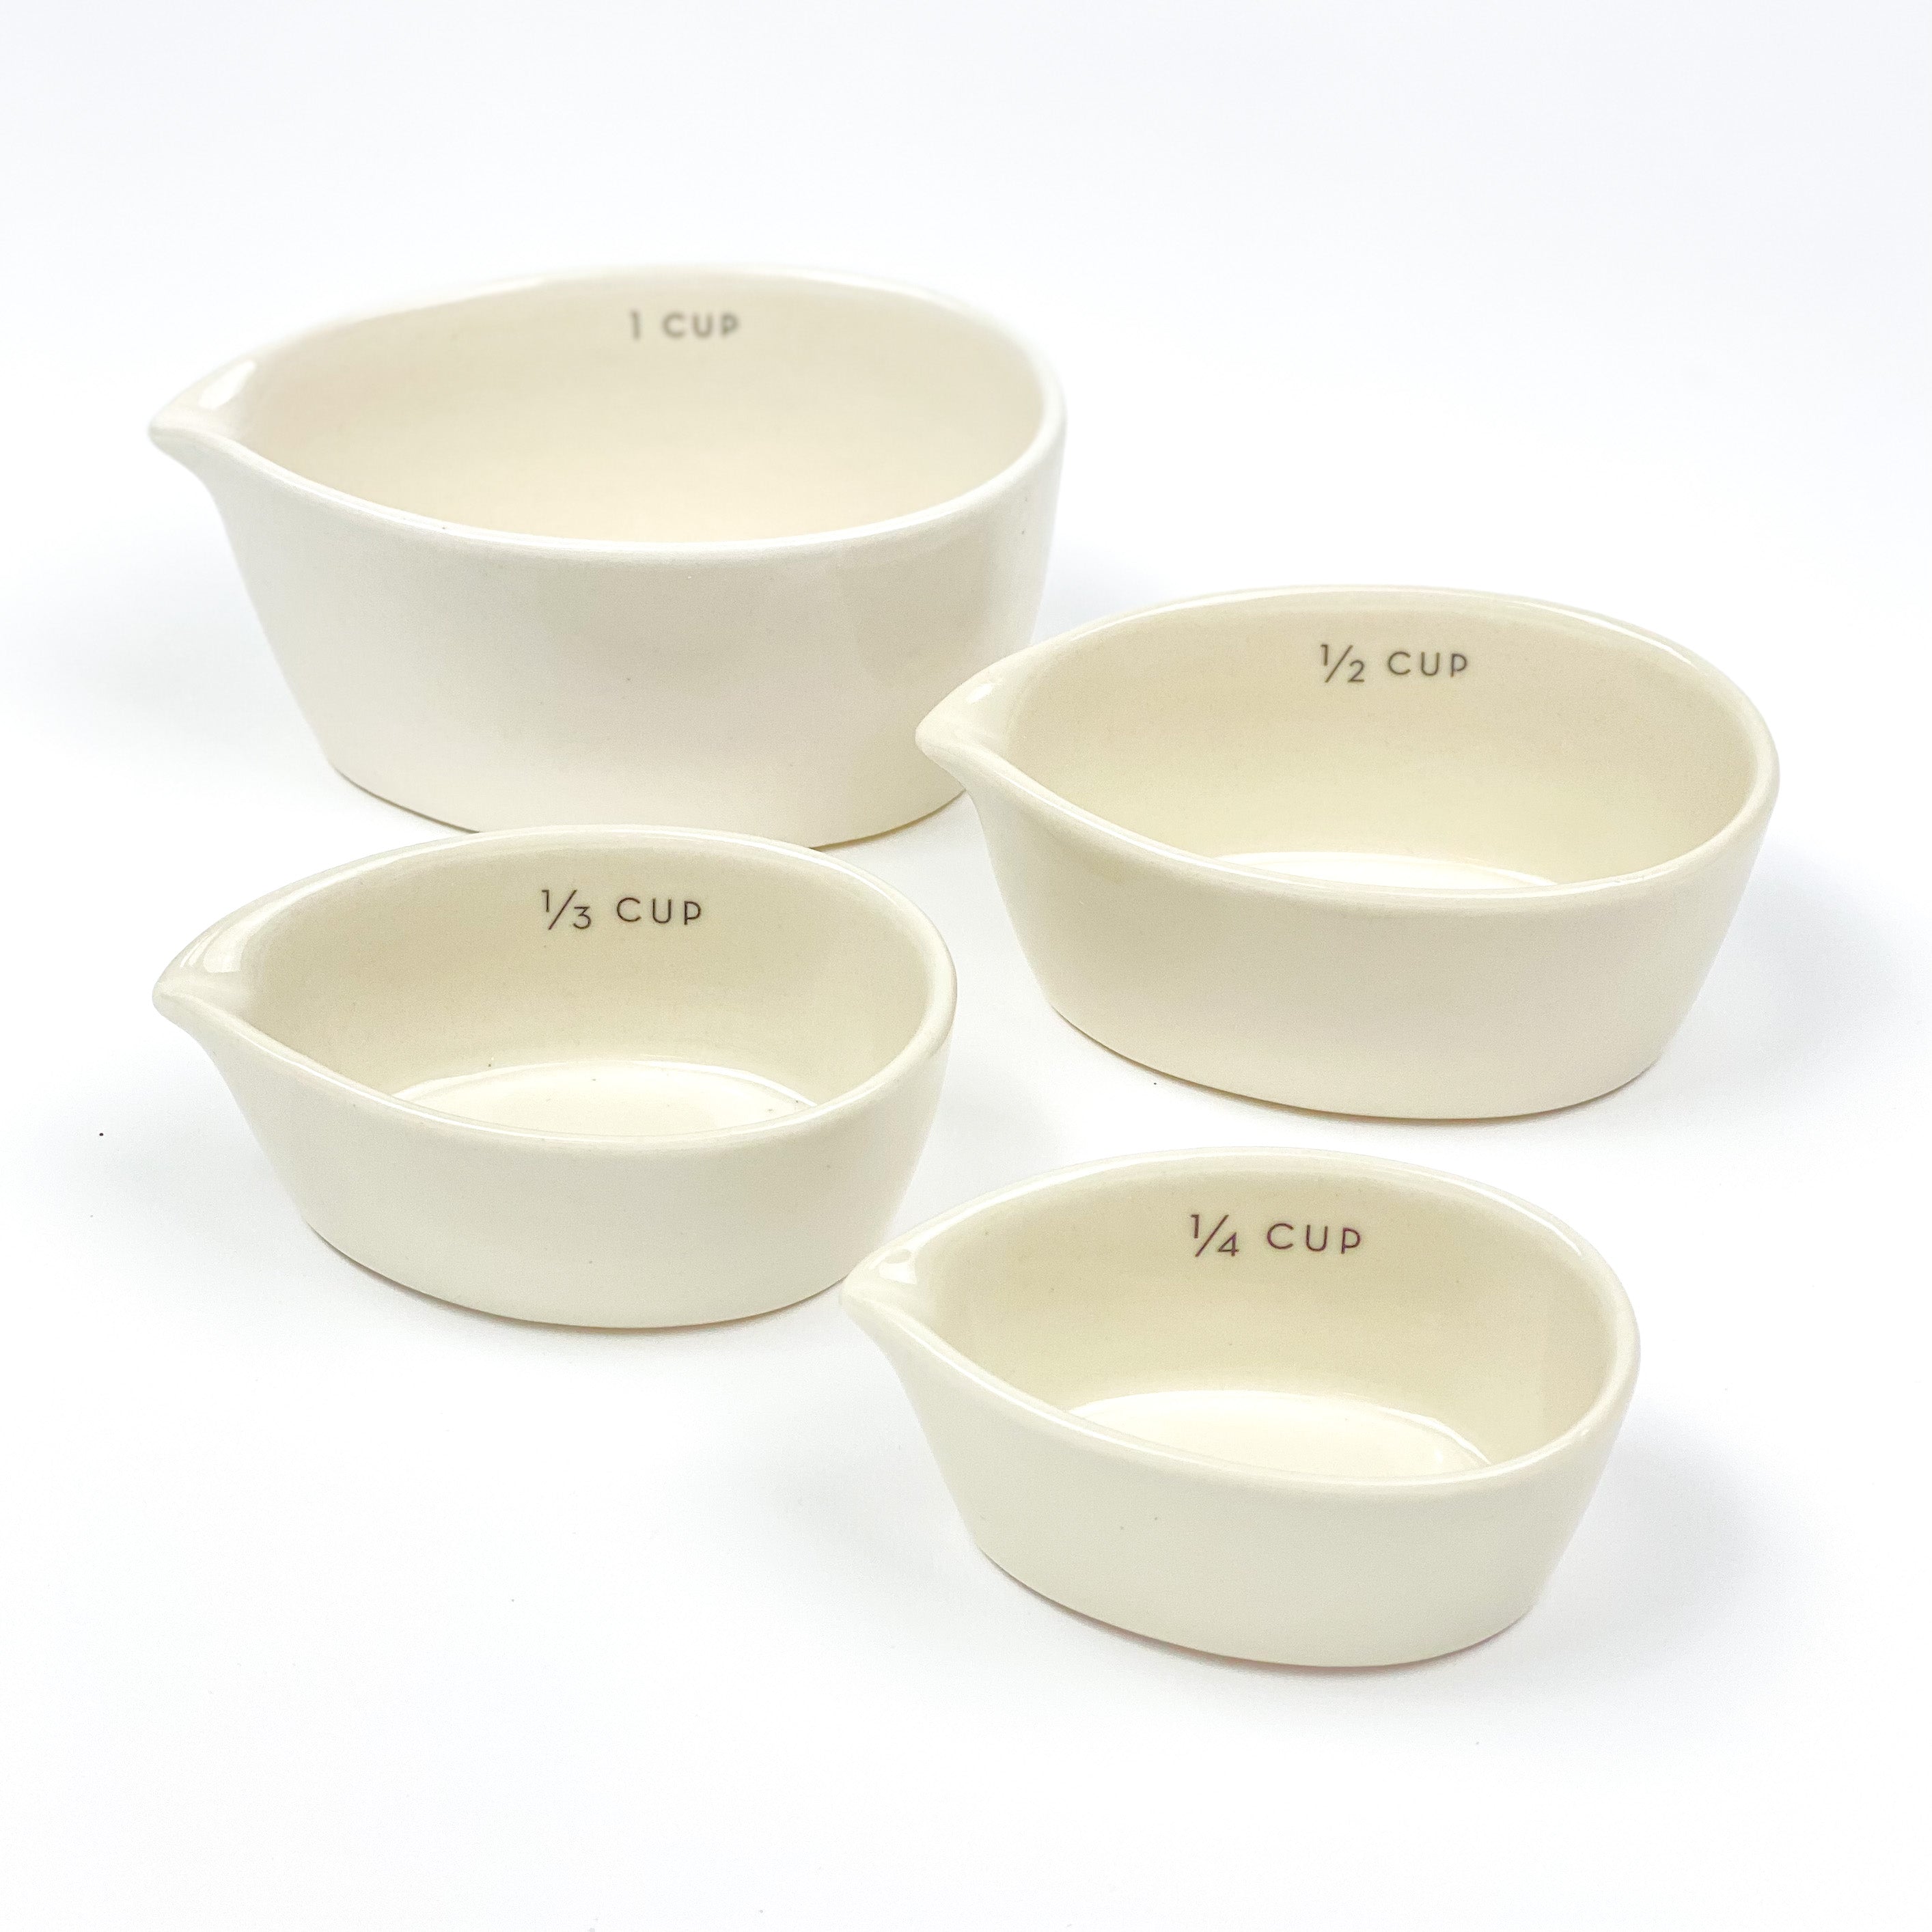 Wilton Navy & Gold Nesting Measuring Cups with Snap-On Ring, 4-Count